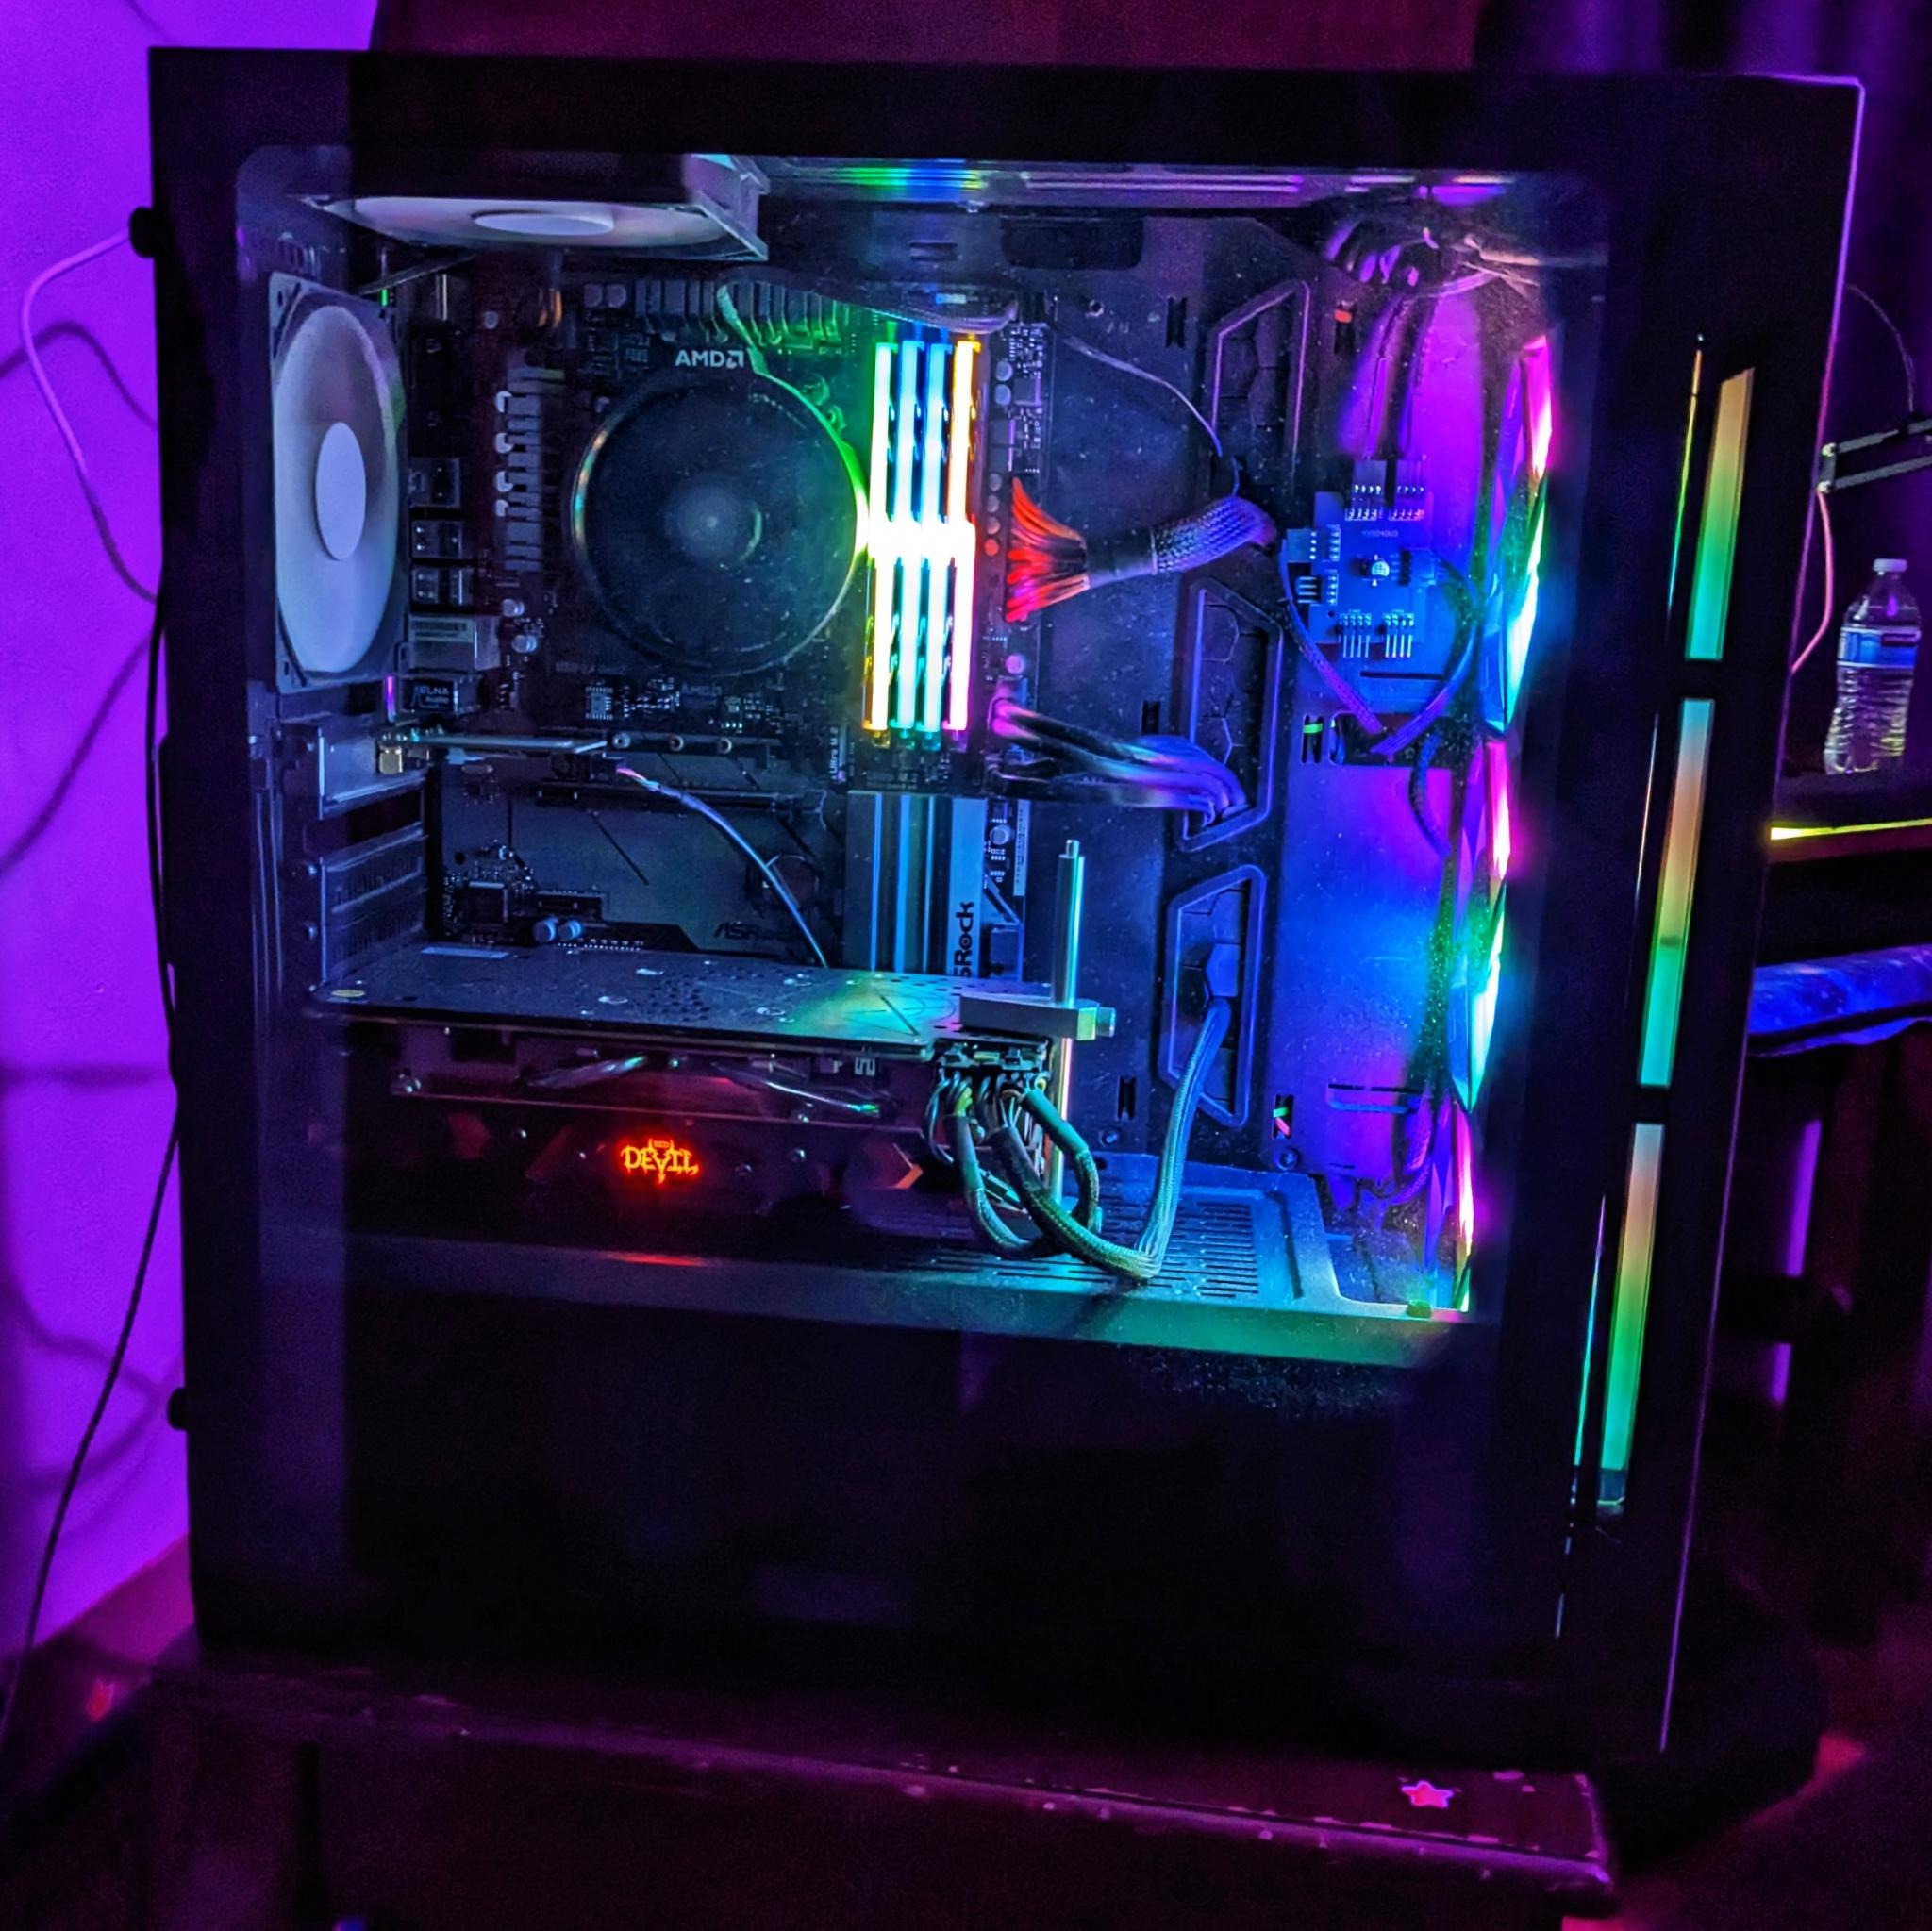 a mid-sized PC tower with a side window to show glowing RGB fans & RAM